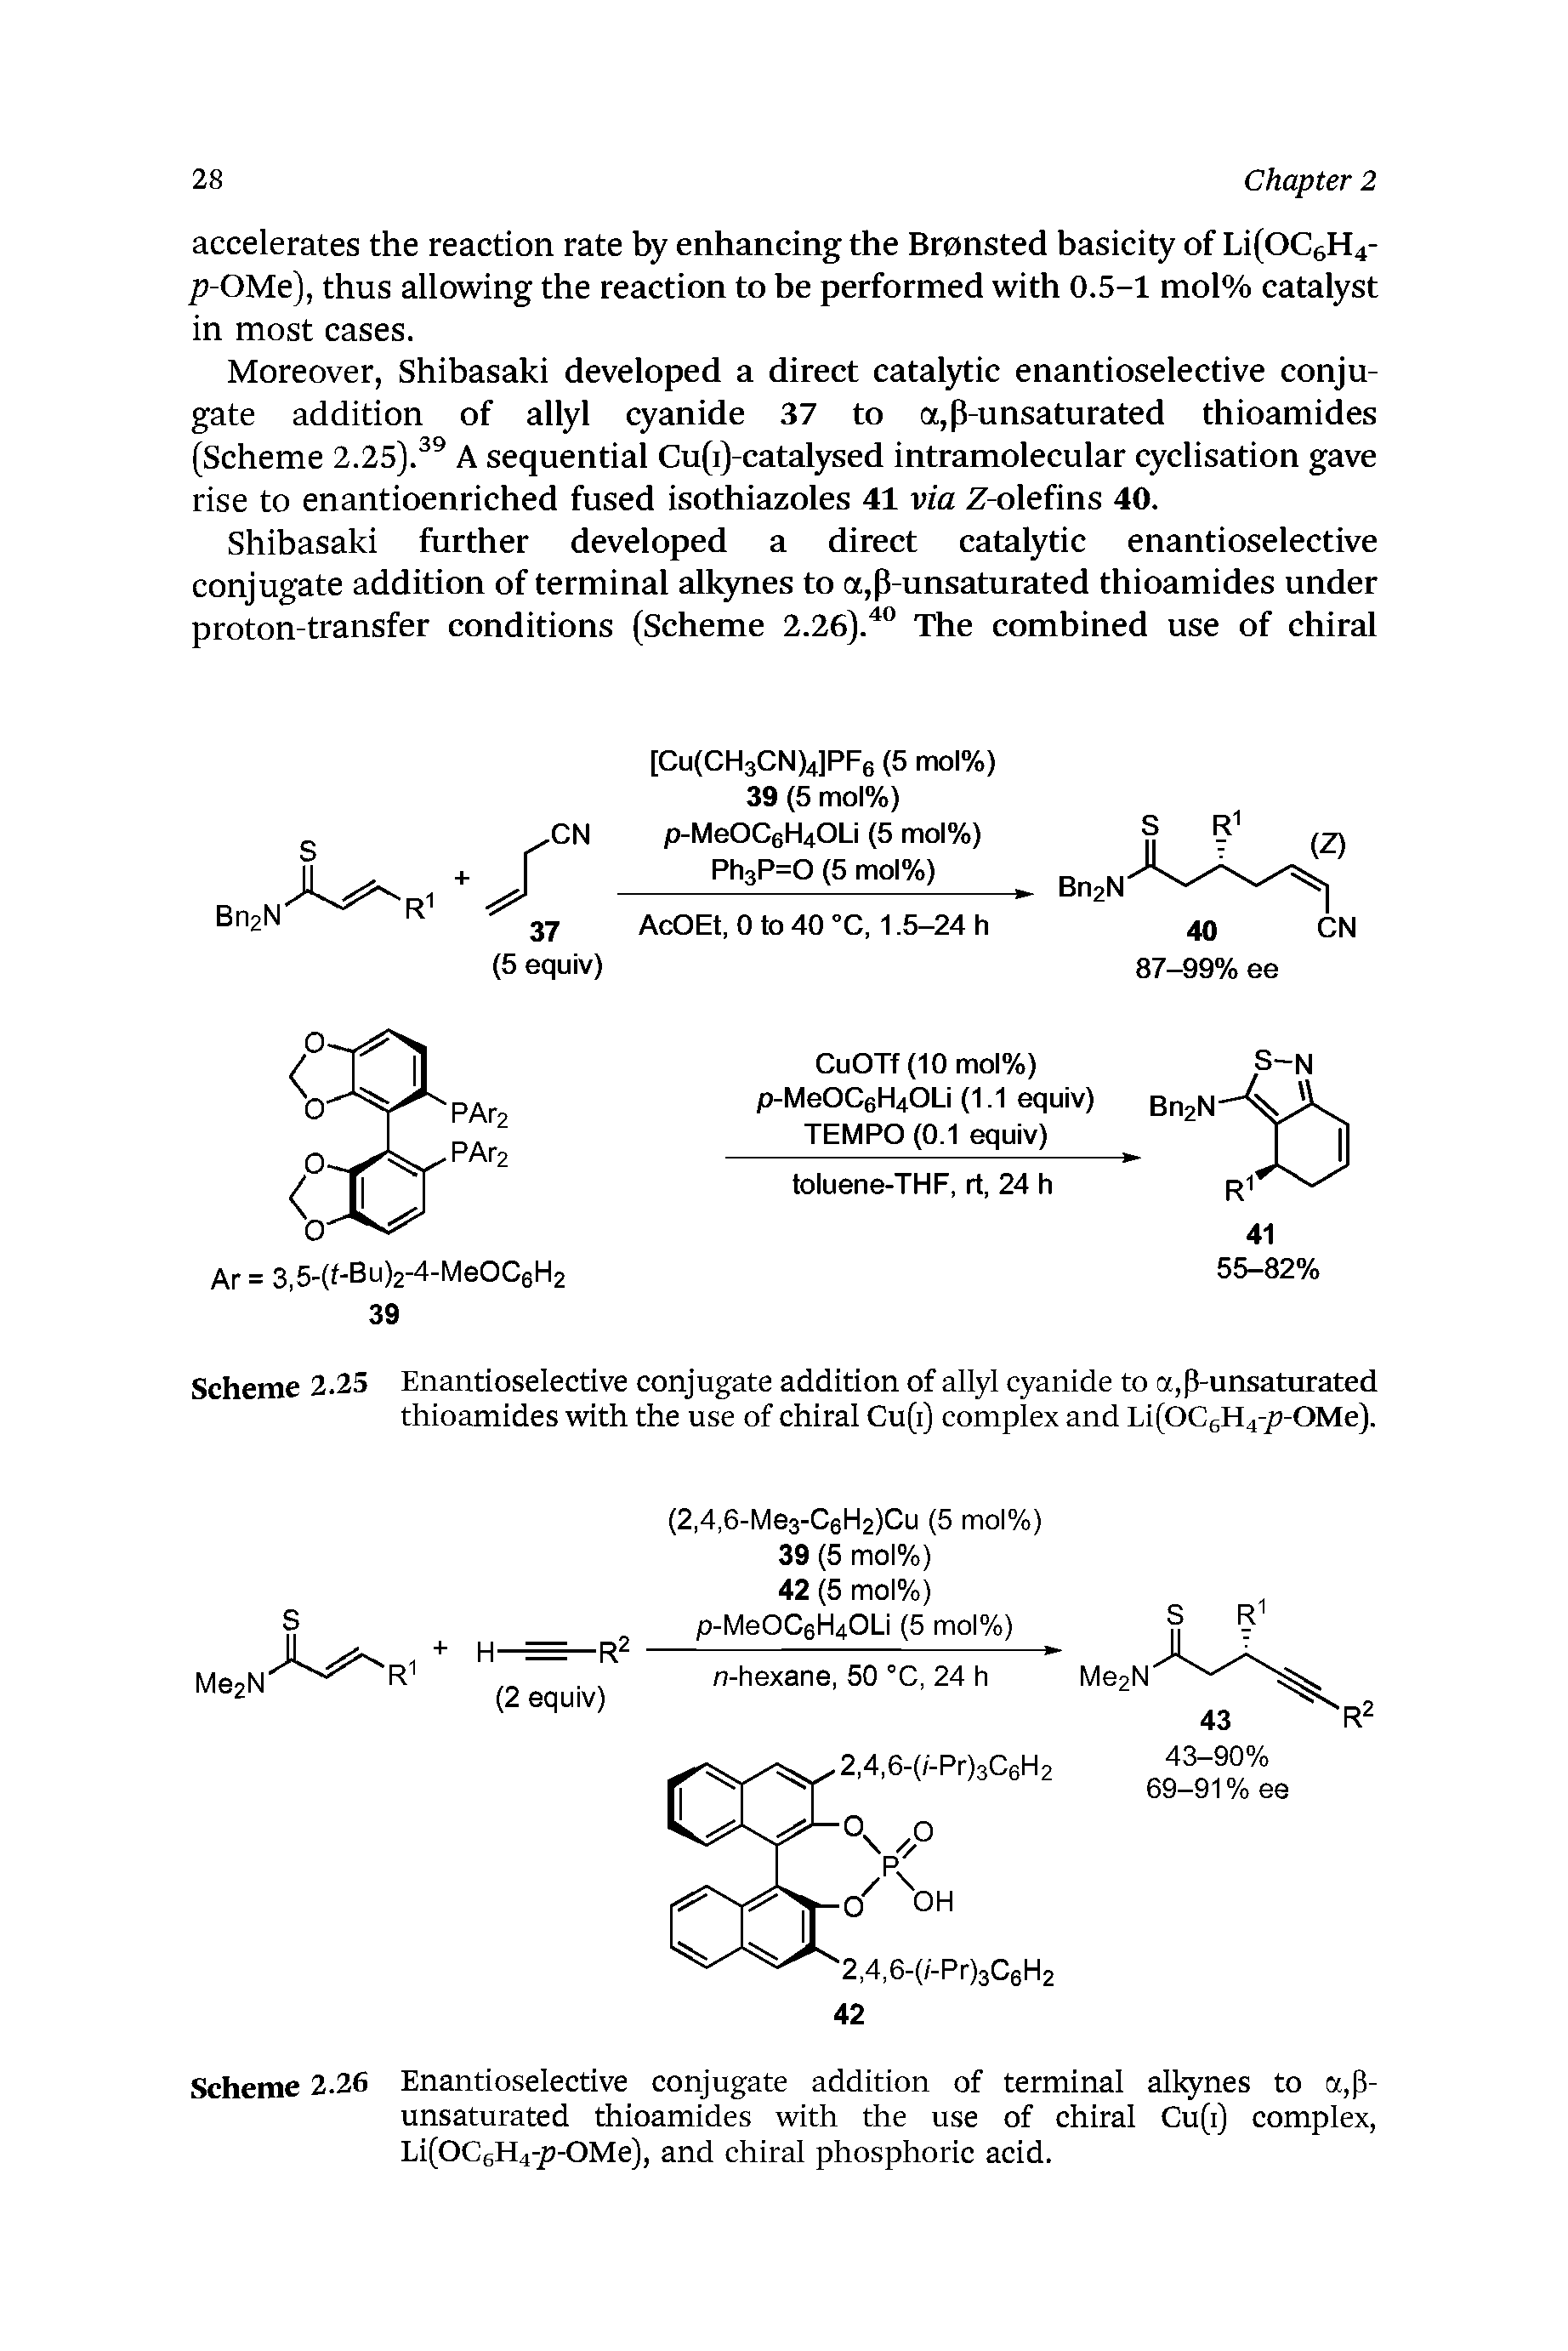 Scheme 2.26 Enantioselective conjugate addition of terminal alkynes to a,p-unsaturated thioamides with the use of chiral Cu(i) complex, Li(OC6H4- 3-OMe), and chiral phosphoric acid.